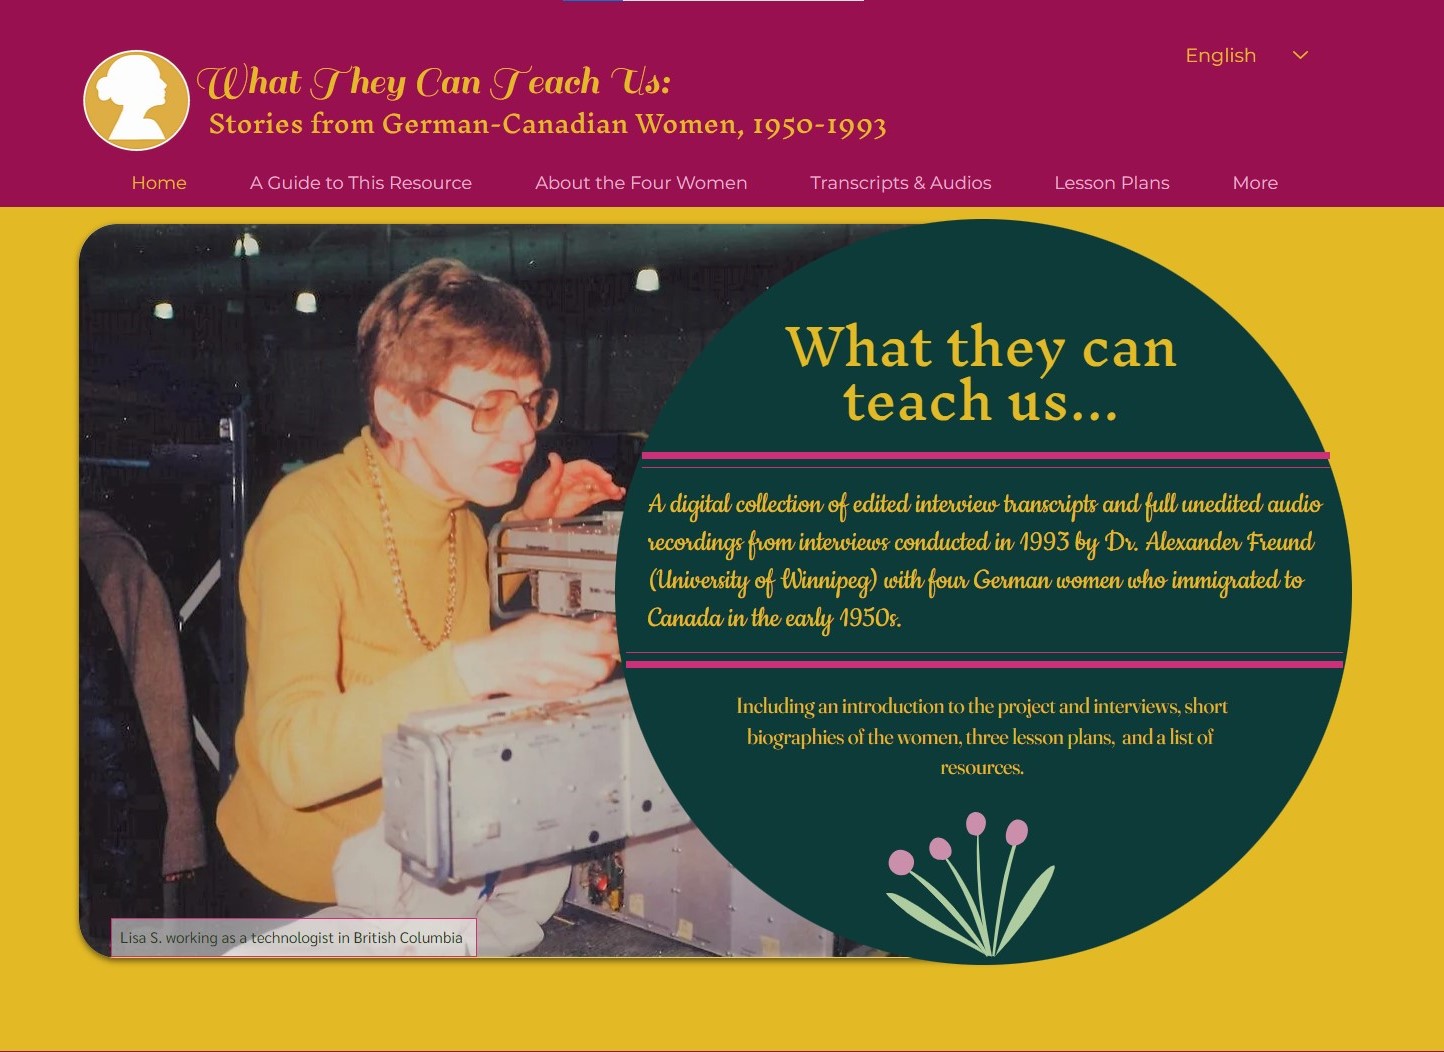 Home page for the What They Can Teach Us: Stories from German-Canadian Women, 1950-1993 website